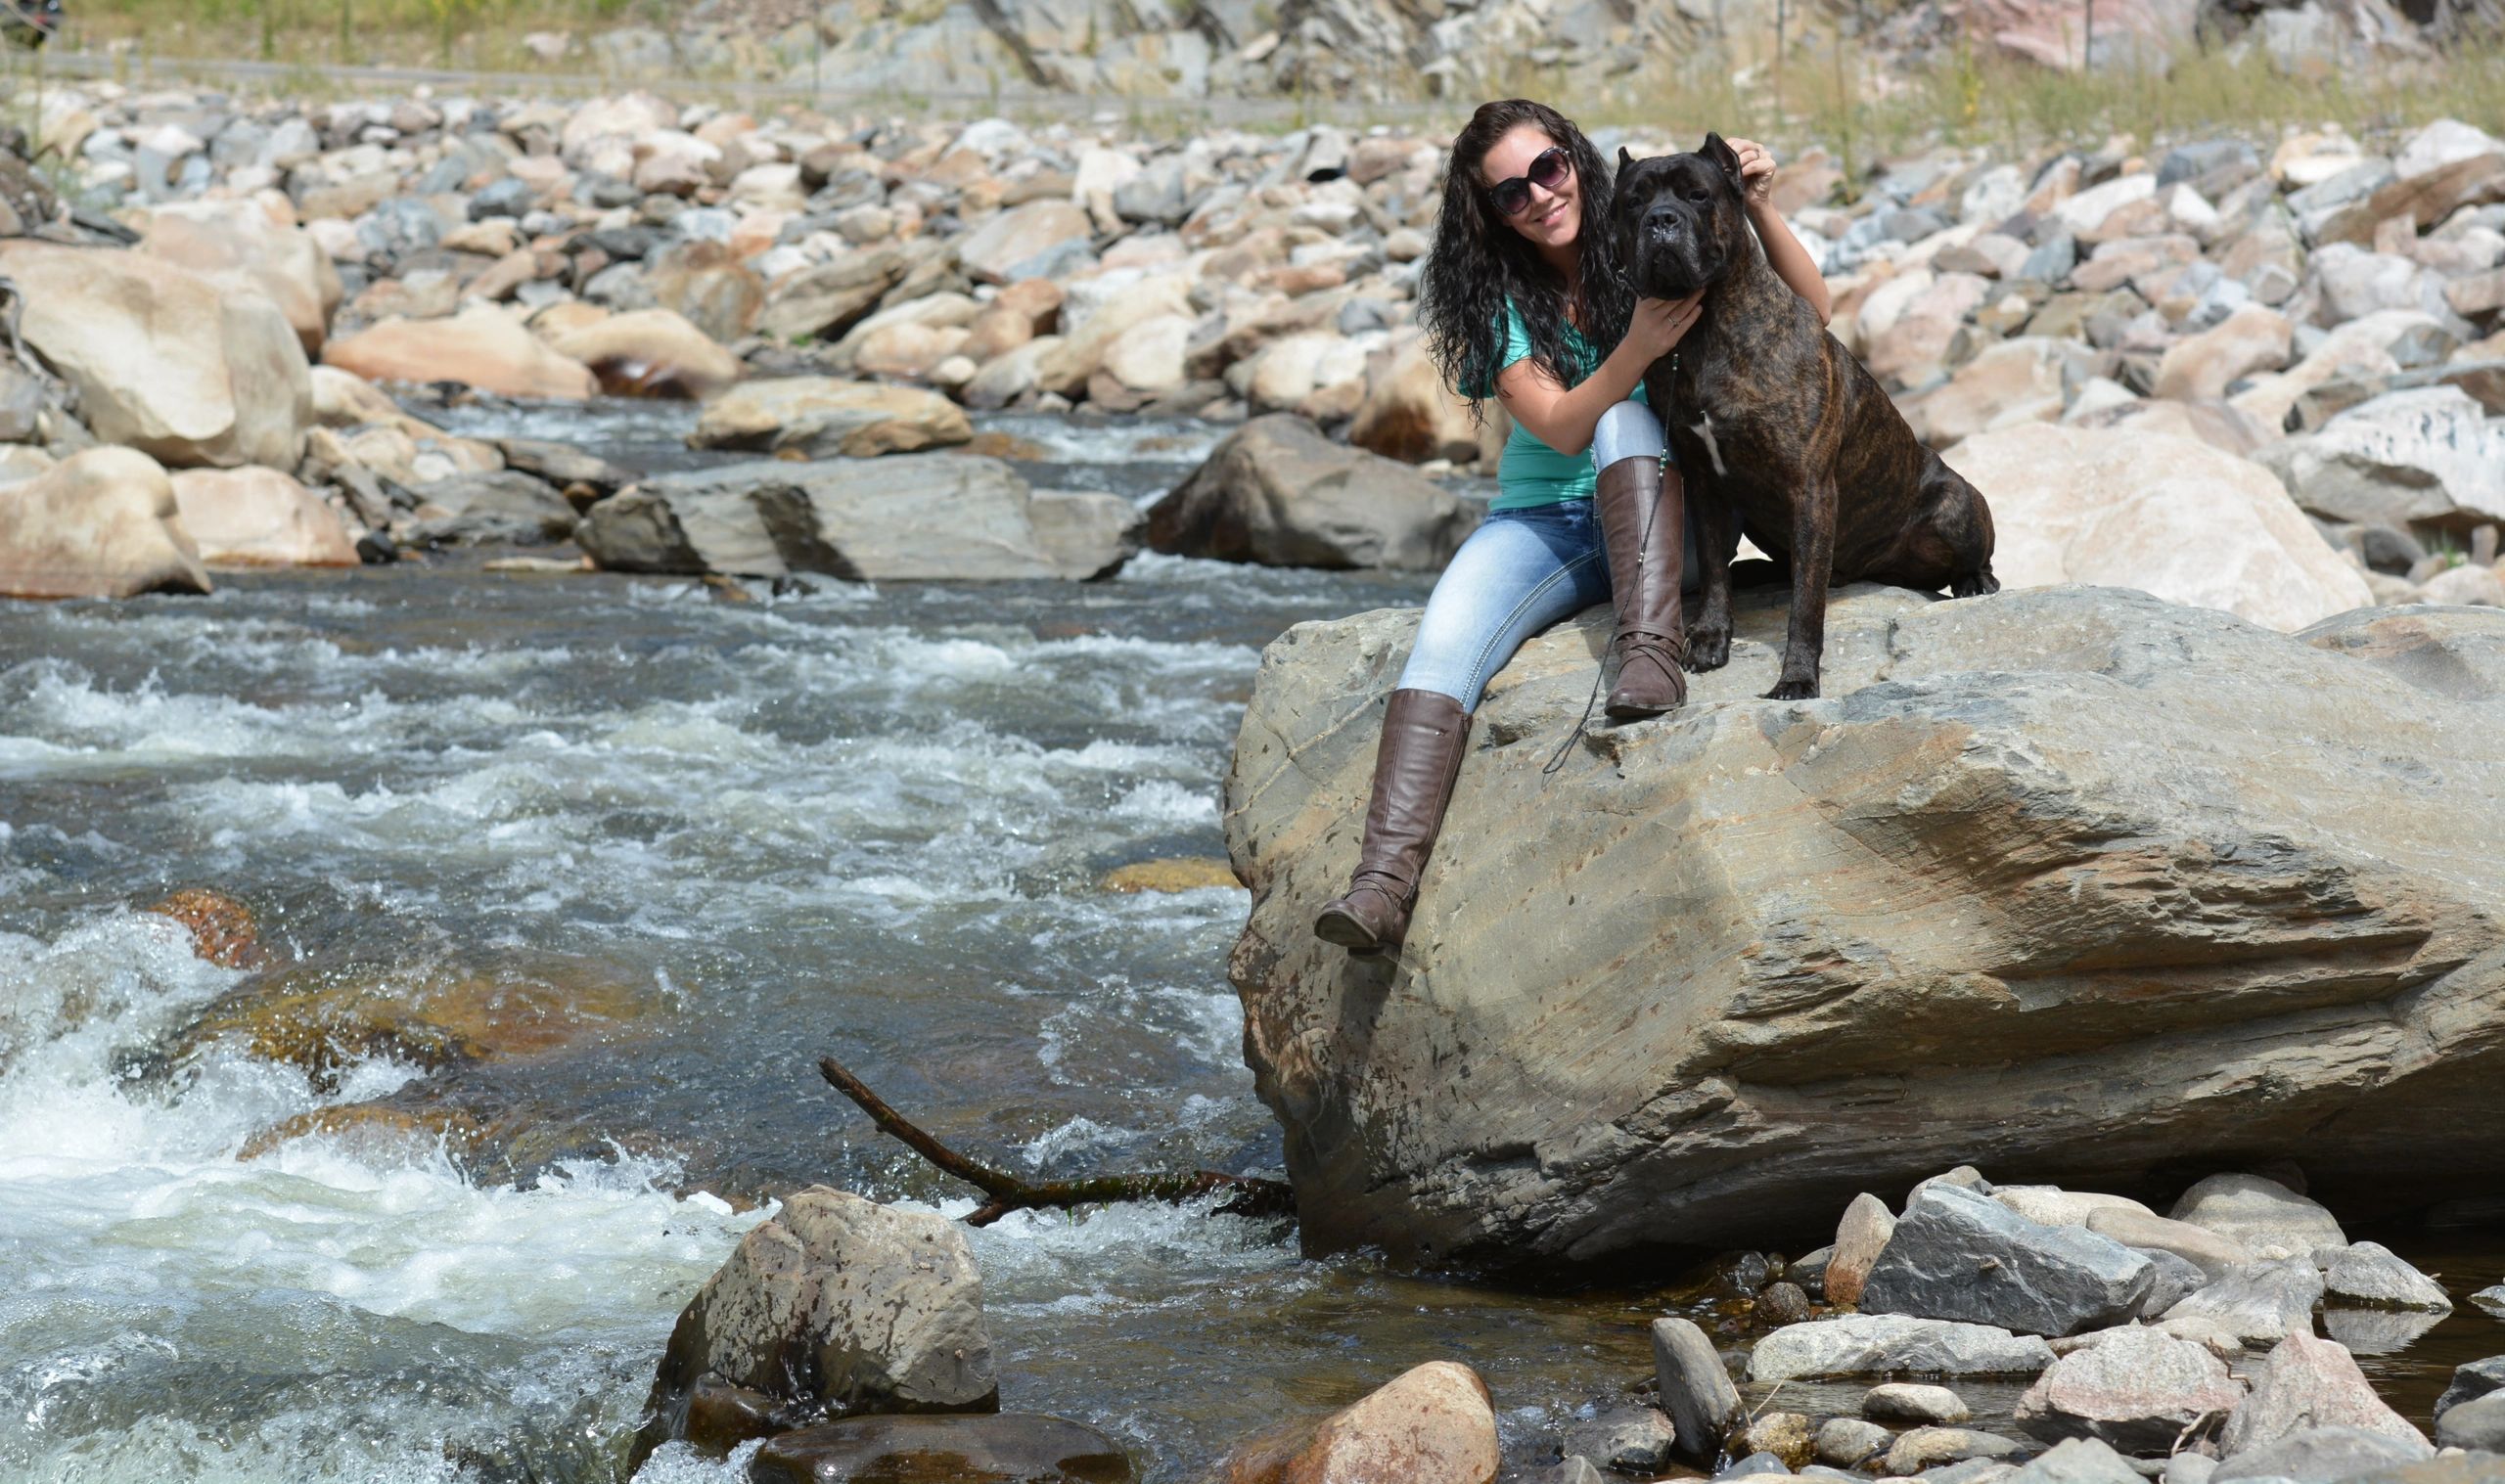 are cane corso good for hiking